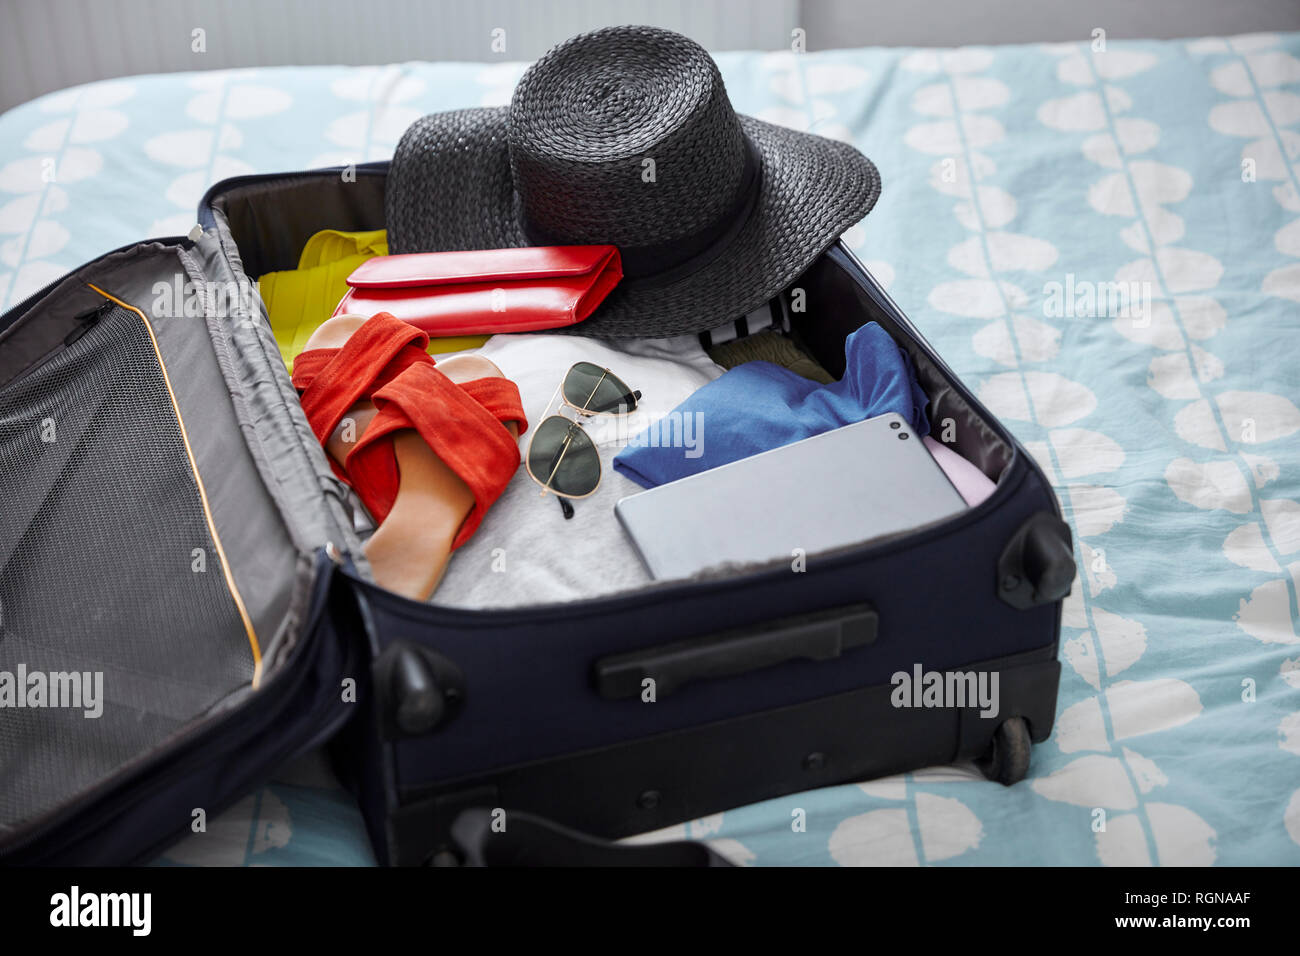 Suitcase with summer vacation utensils on bed Stock Photo